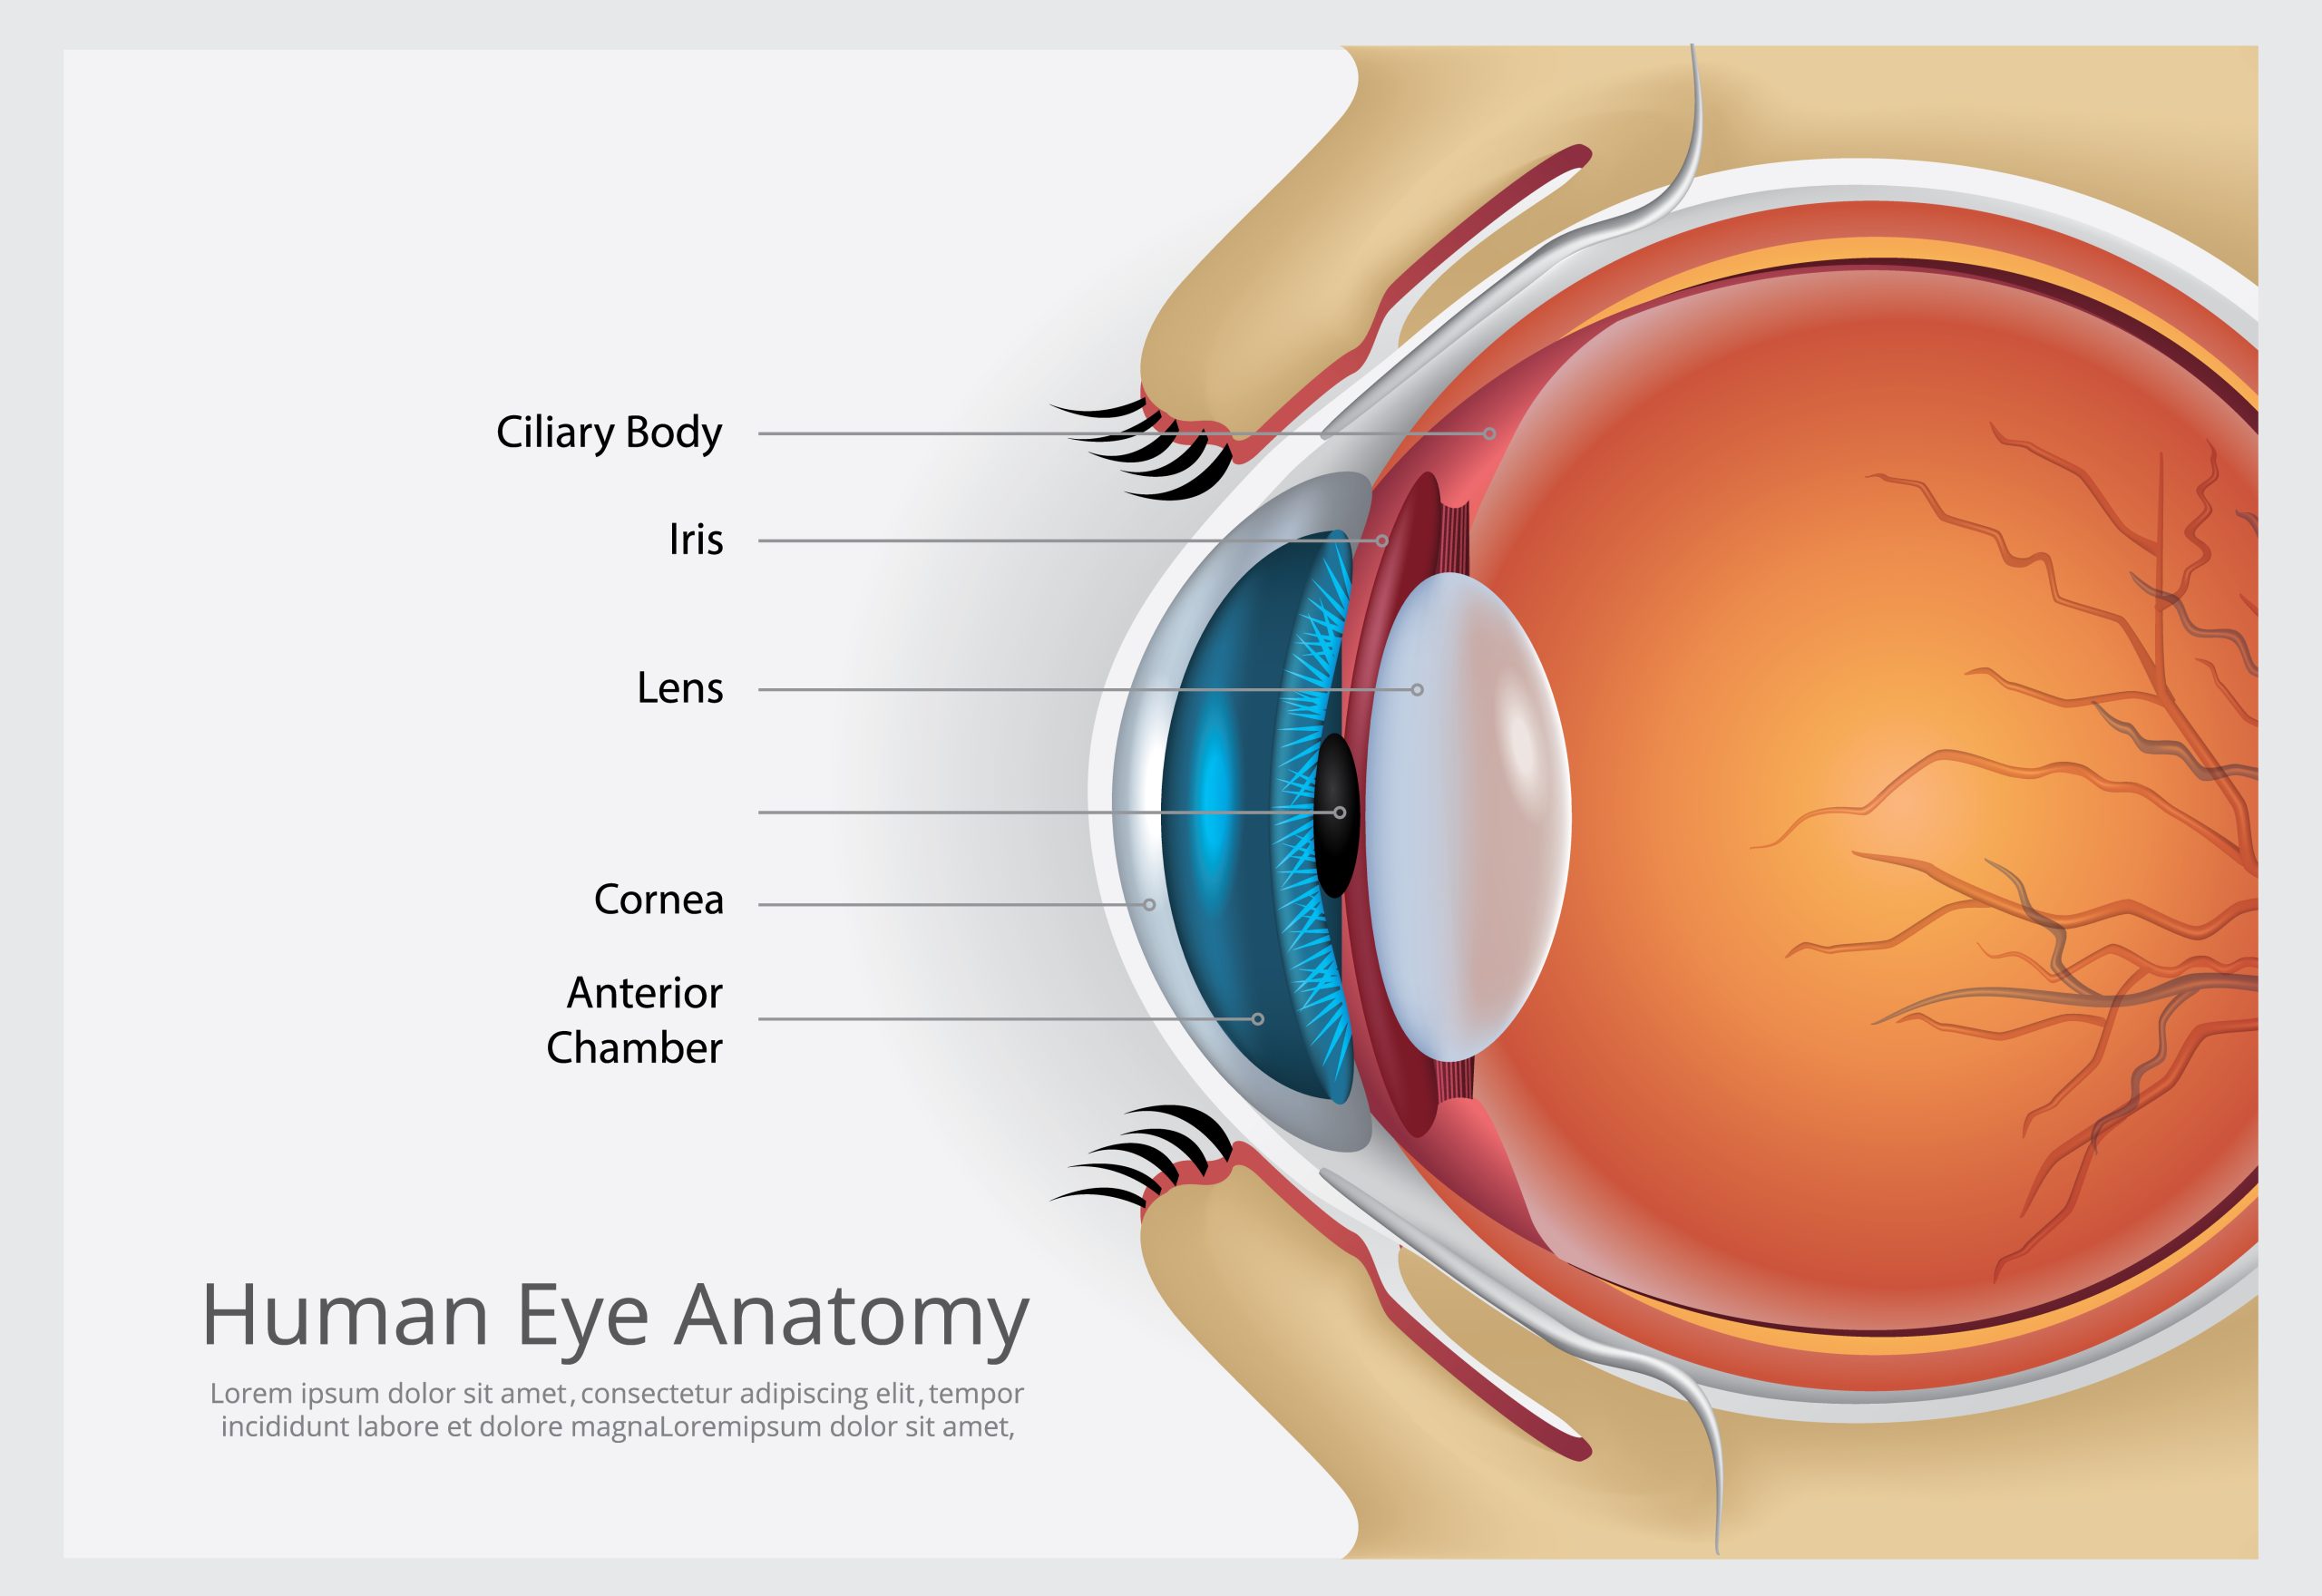 The Anatomy of the Eyelid: An In-depth Look